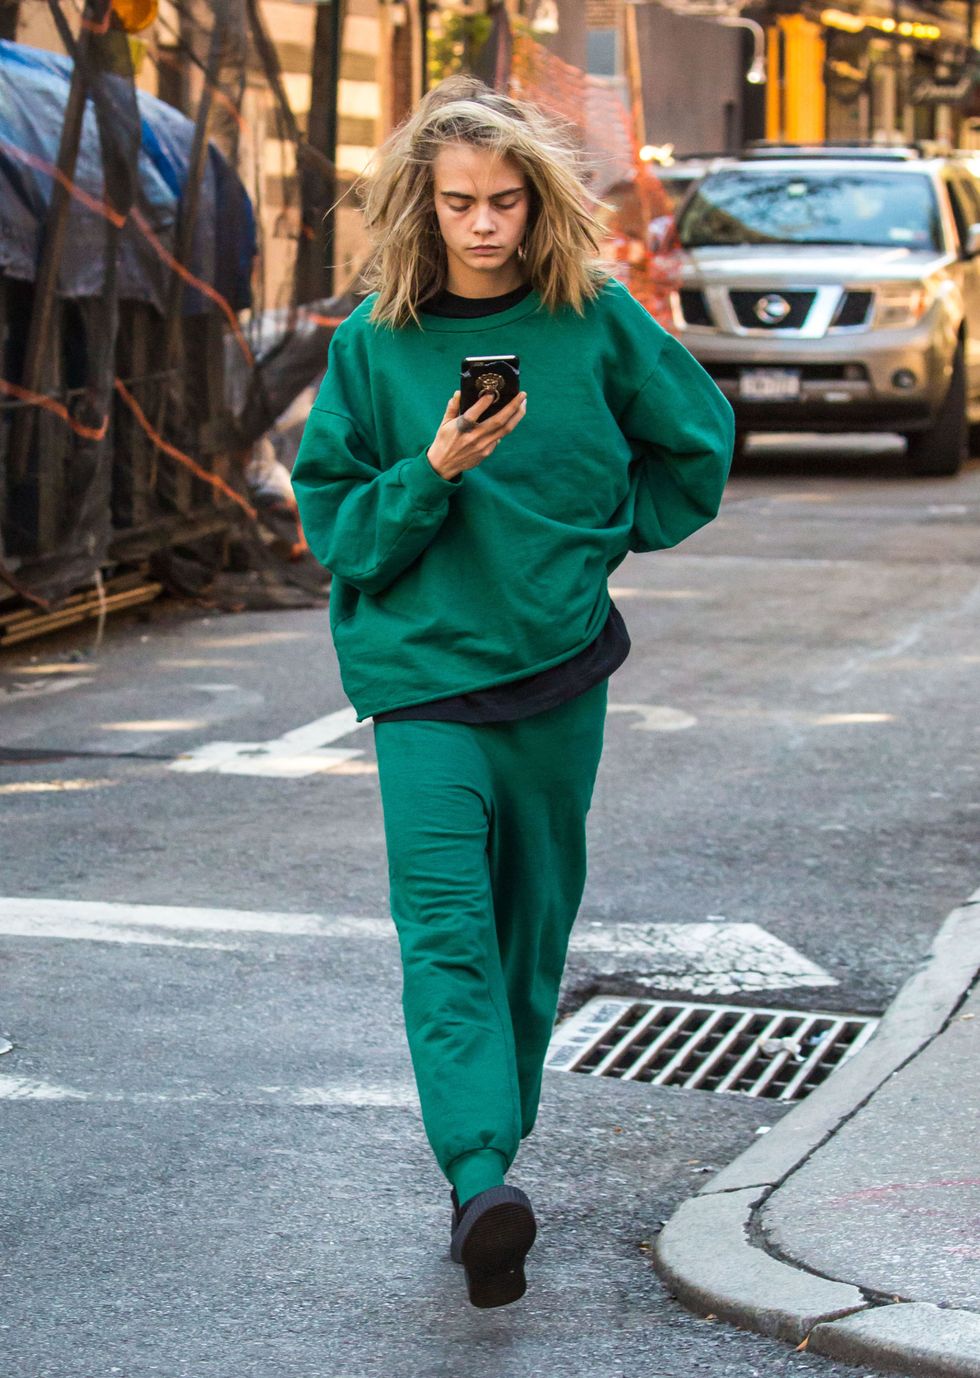 Green, Outerwear, Street, Street fashion, Teal, Turquoise, Jacket, Grille, Snapshot, Active pants, 